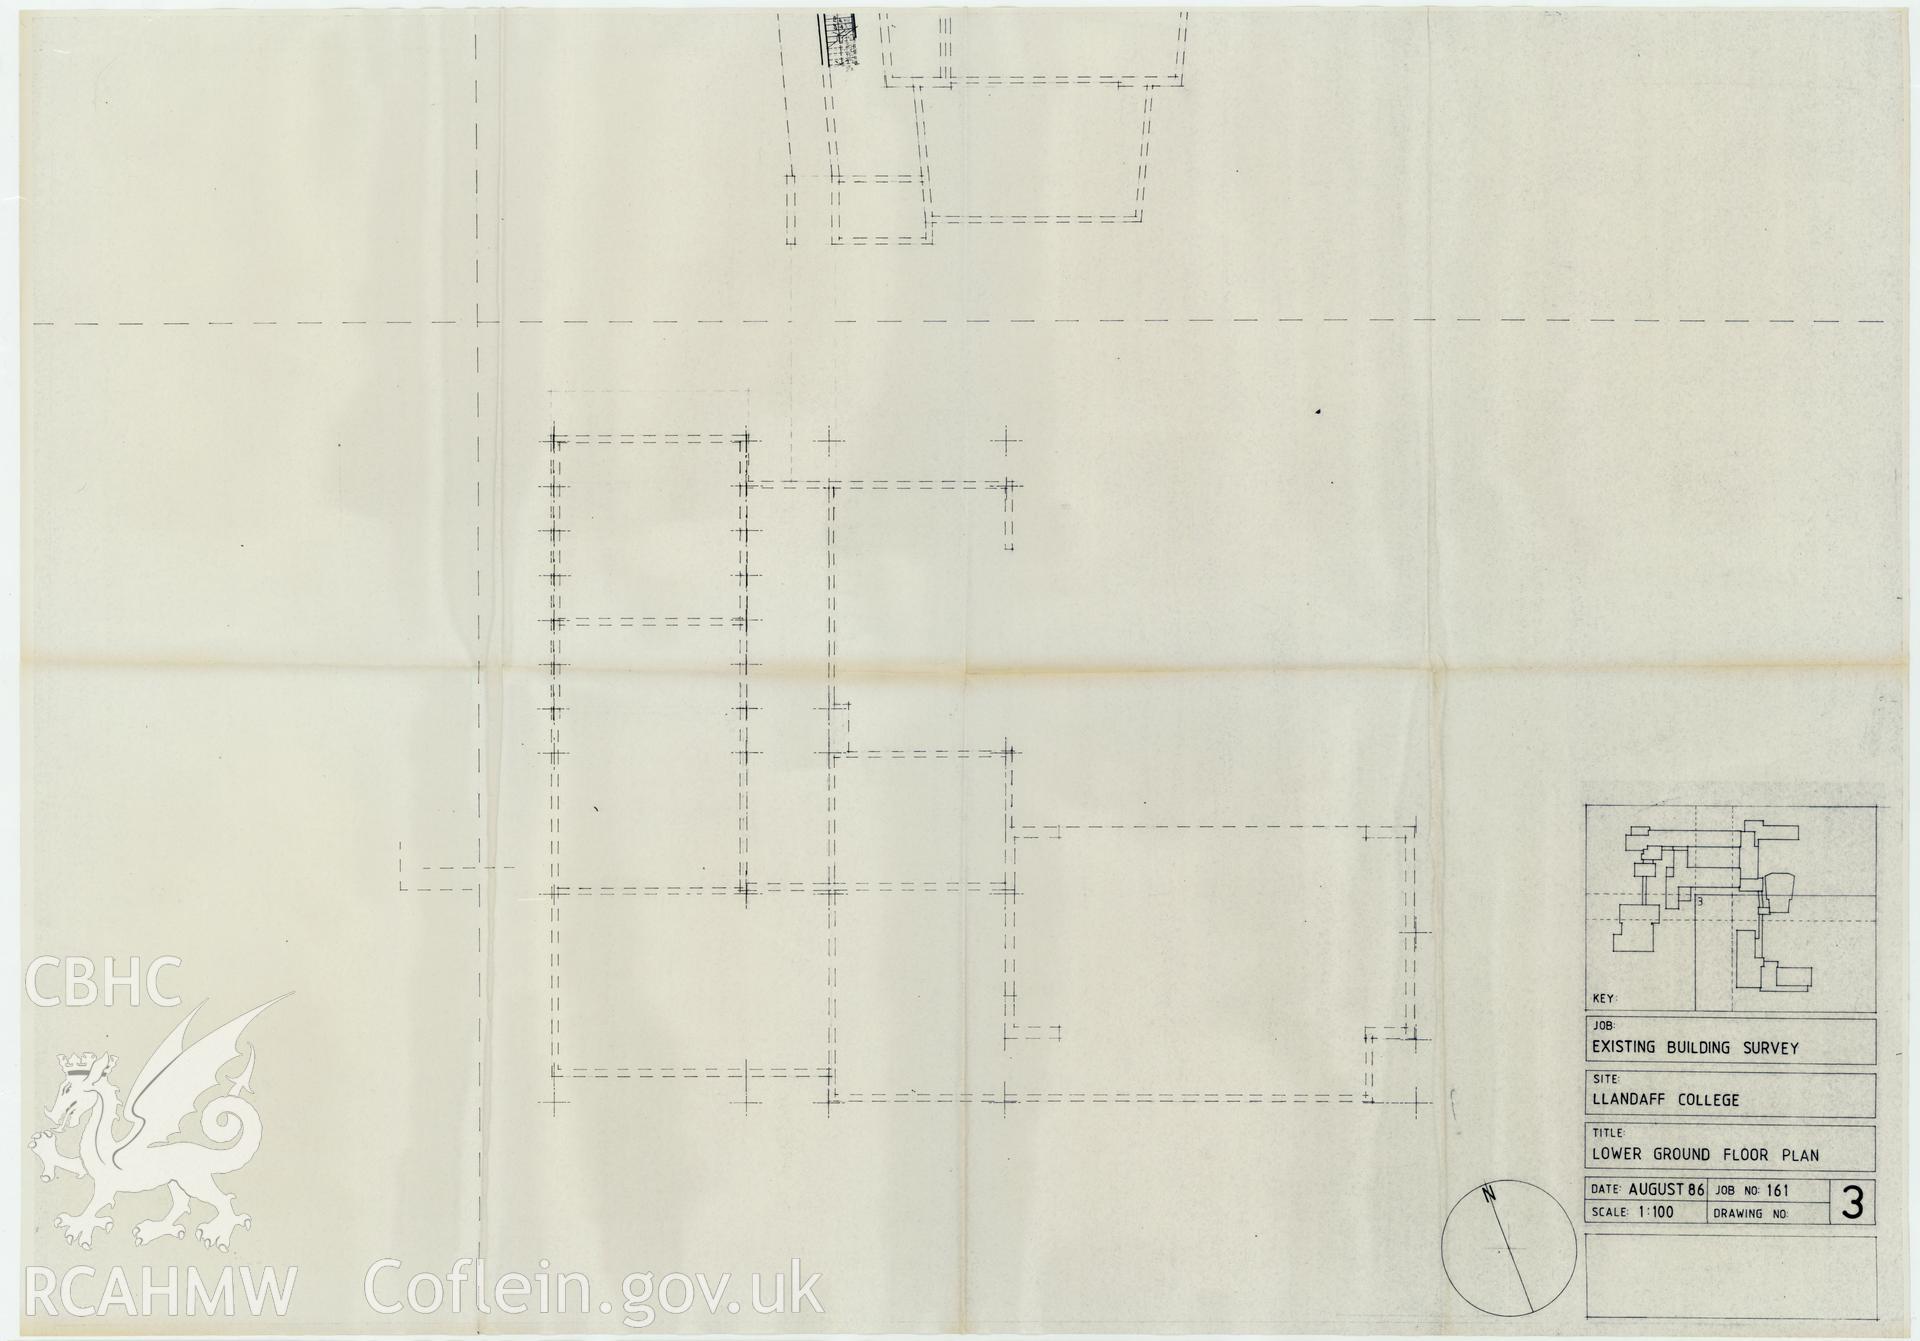 Plan of the lower ground floor of Llandaff College, Cardiff. The existing building survey, August 1986, No 3.